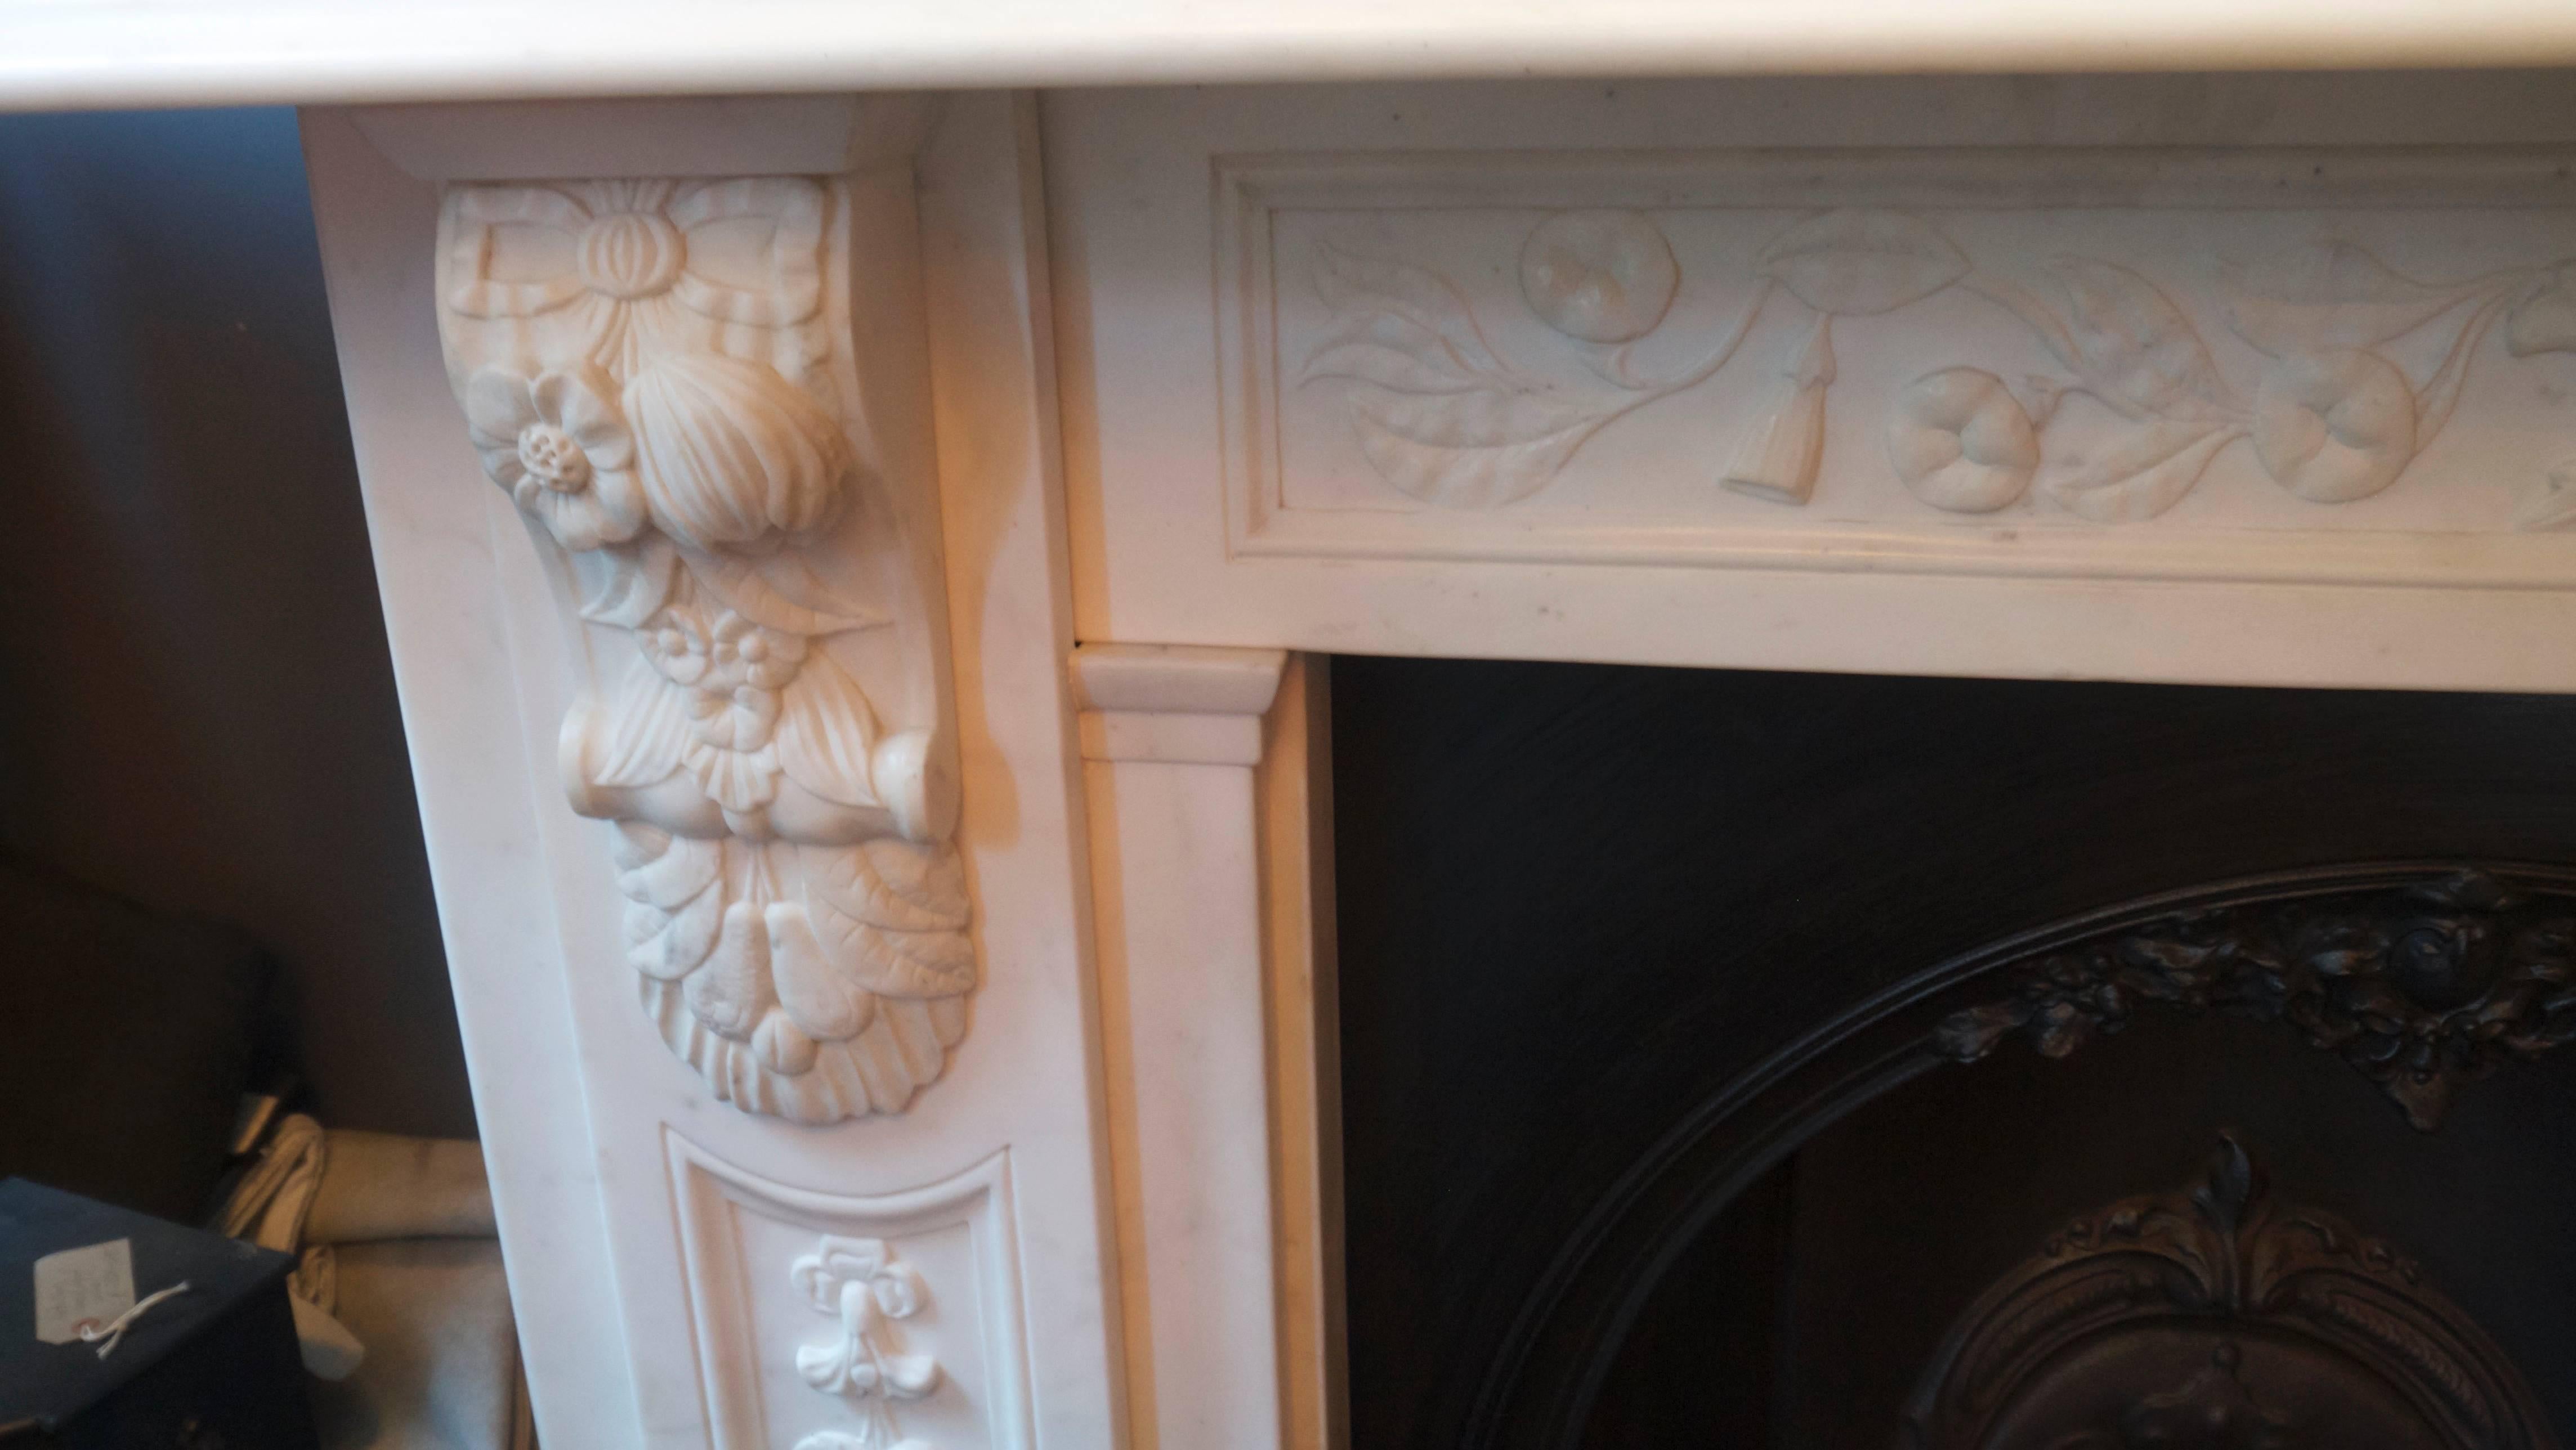 Original antique Statuary white Victorian marble corbel fireplace mantelpiece with carved frieze, legs and corbels. Opening size 35.75